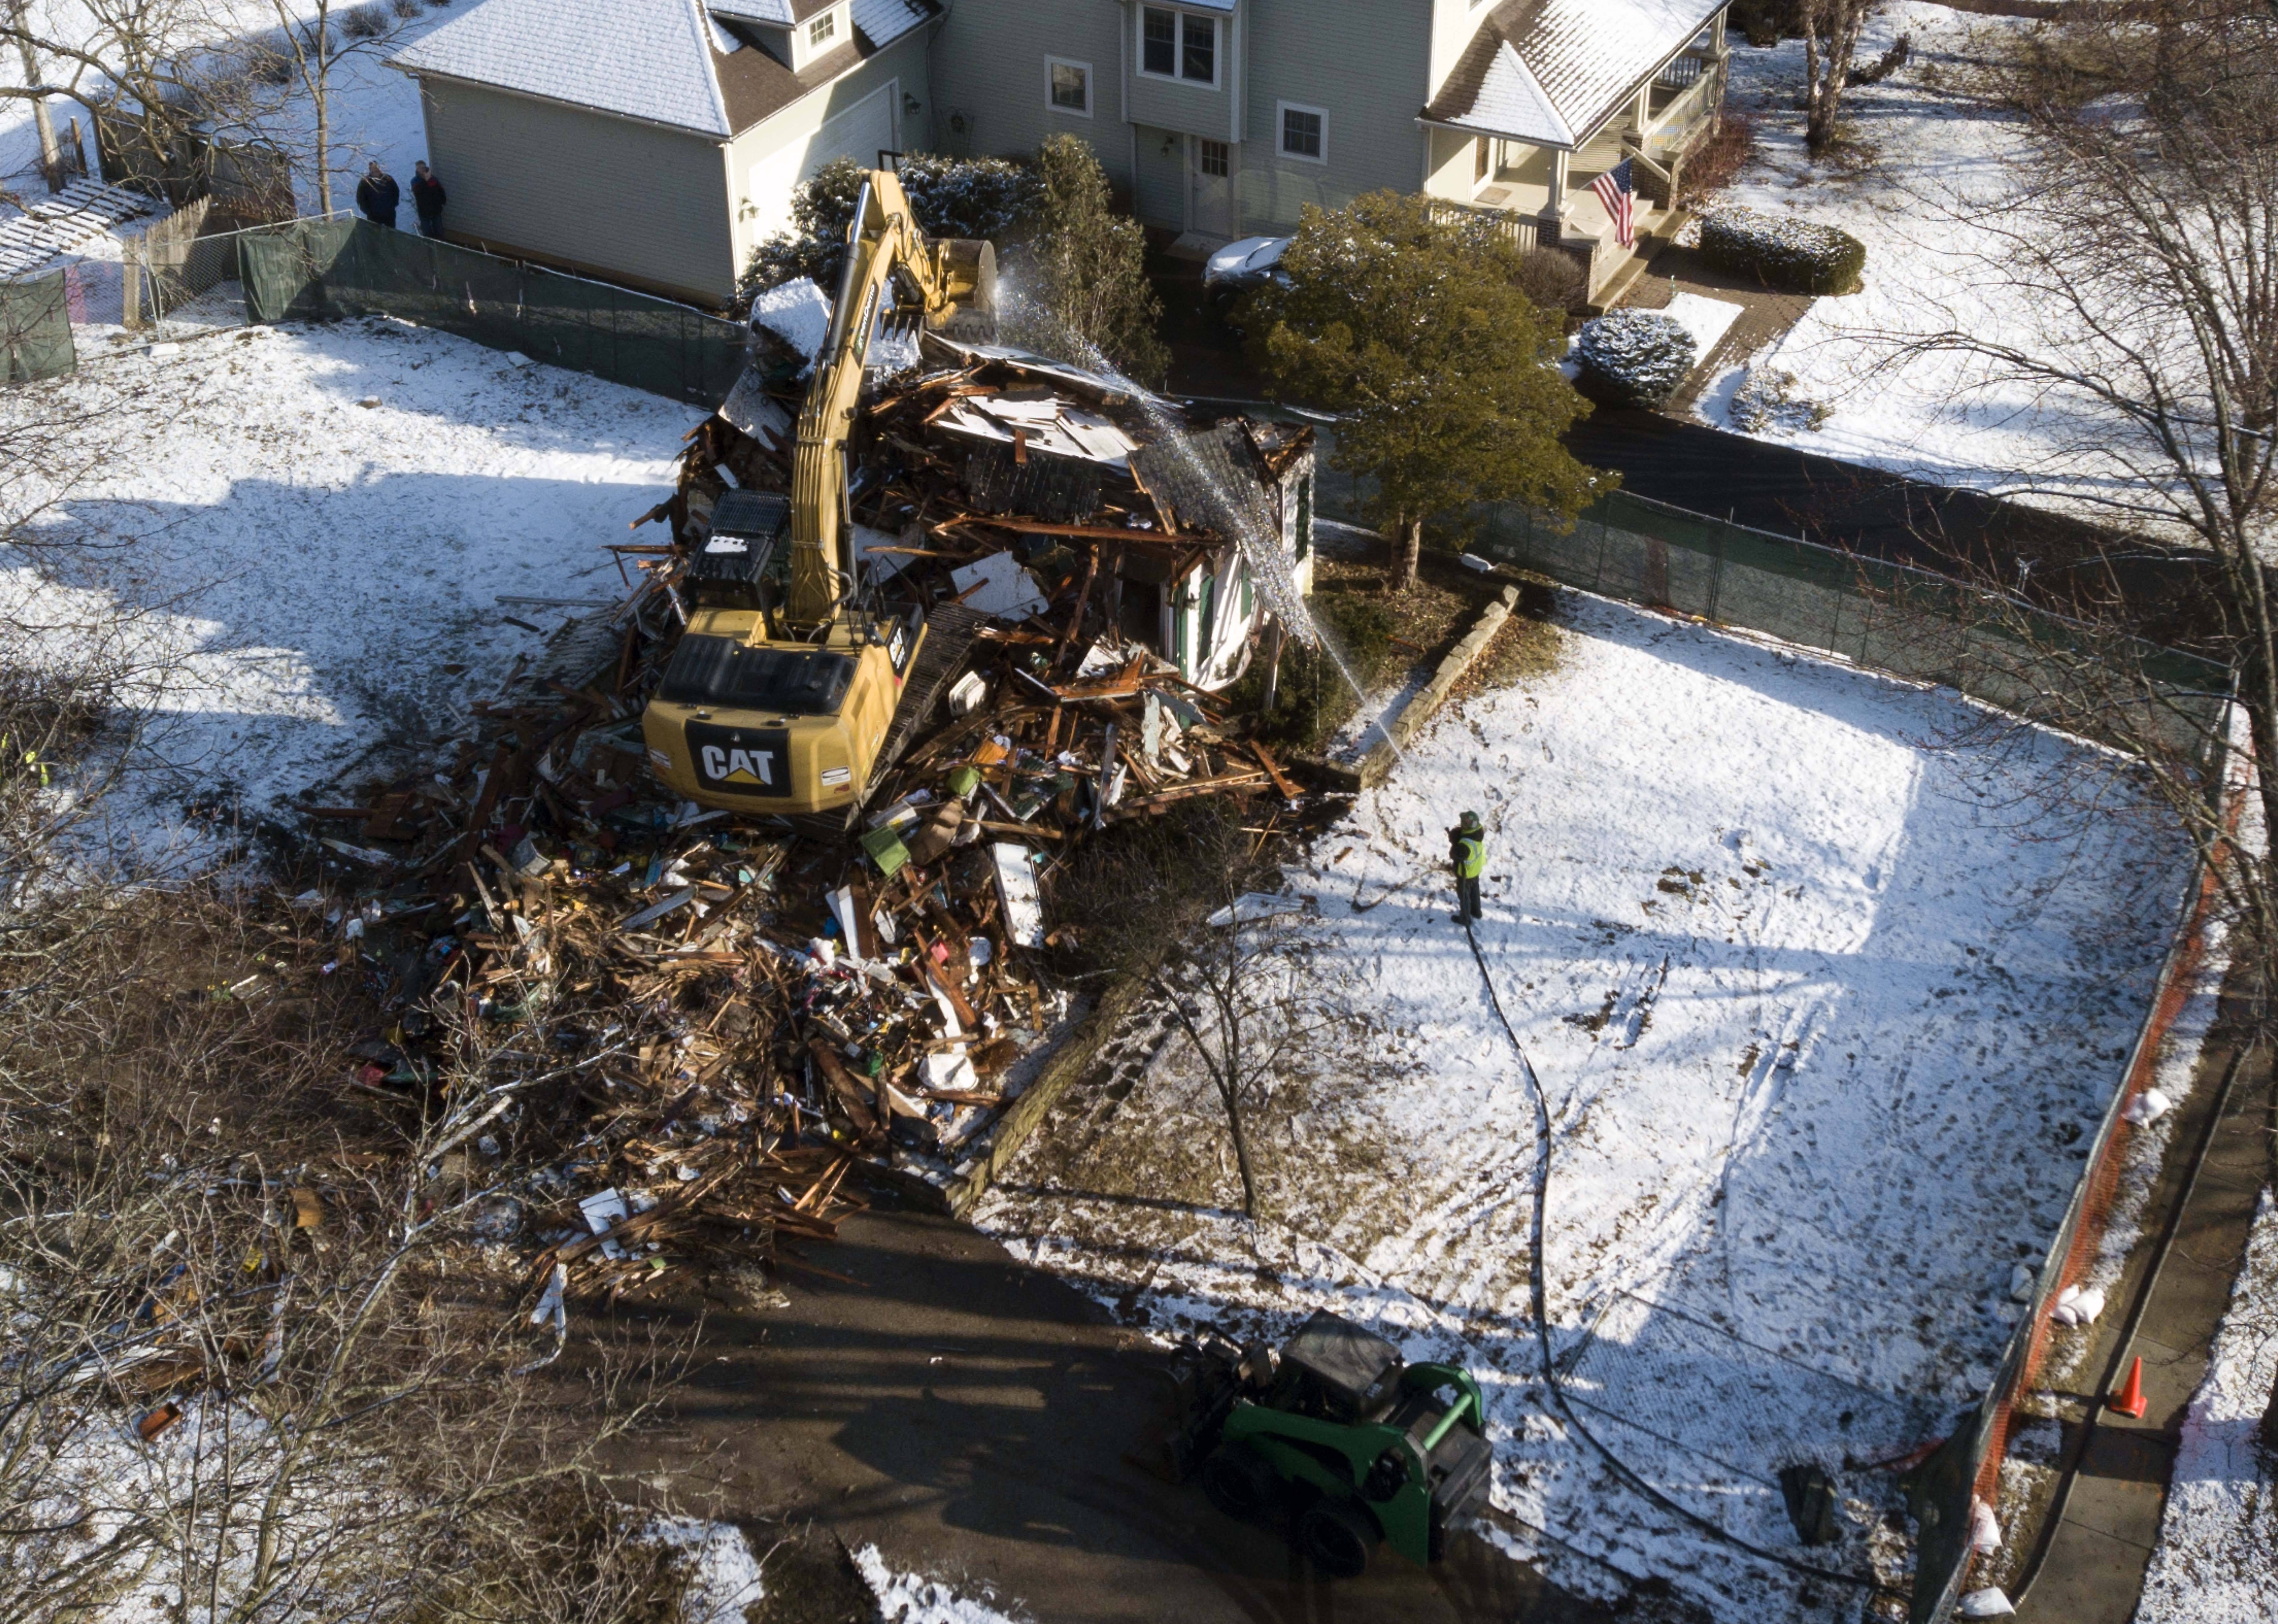 Nearly a year after 5-year old AJ Freund was killed by his parents, the Crystal Lake home where prosecutors allege that occurred is being demolished.&nbsp;